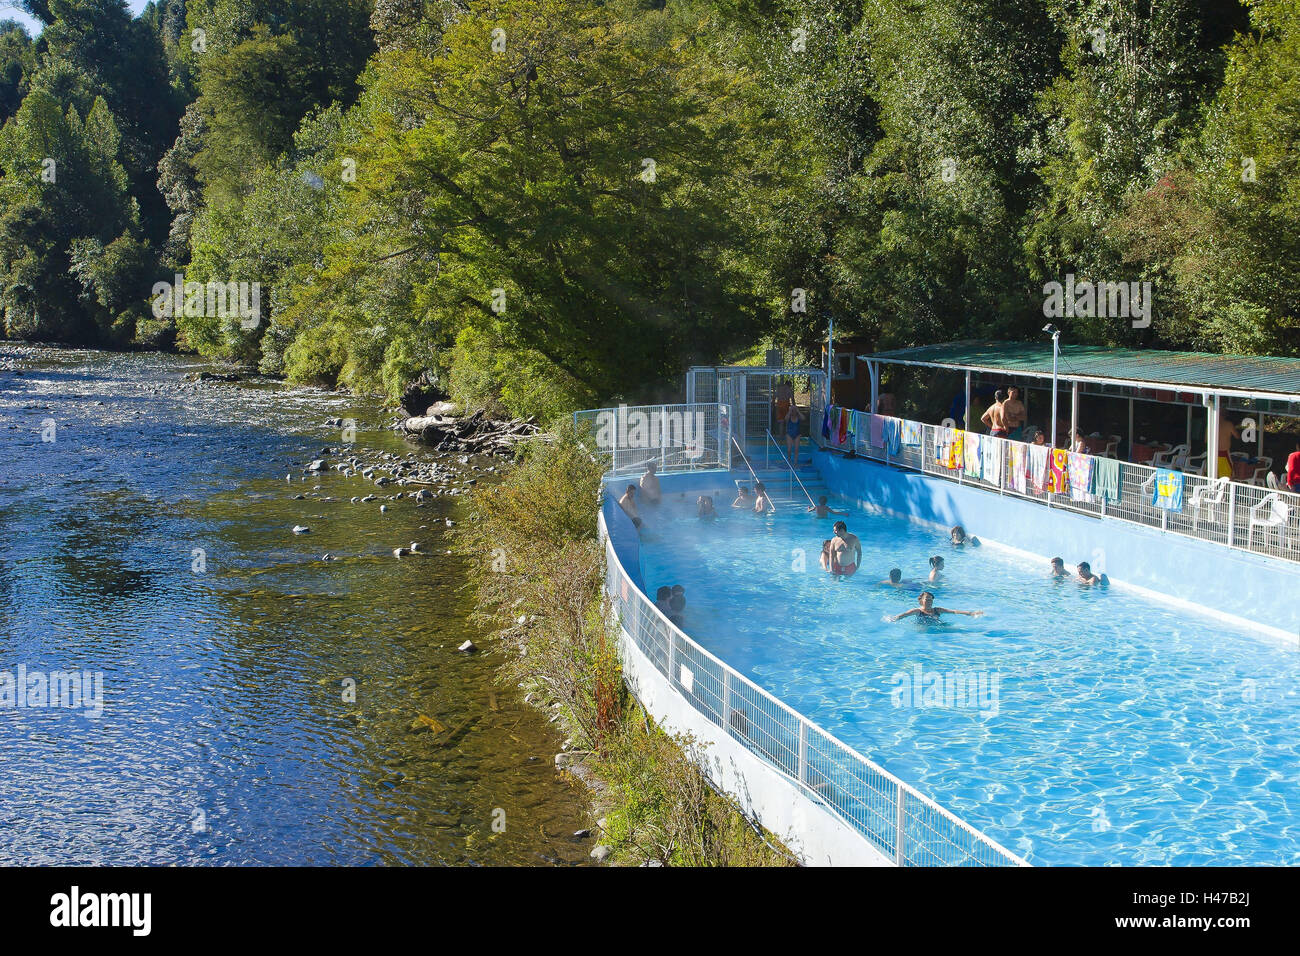 Chile, Patagonia, national park Puyehue, thermal bath, outside cymbal, bathers, river, Stock Photo